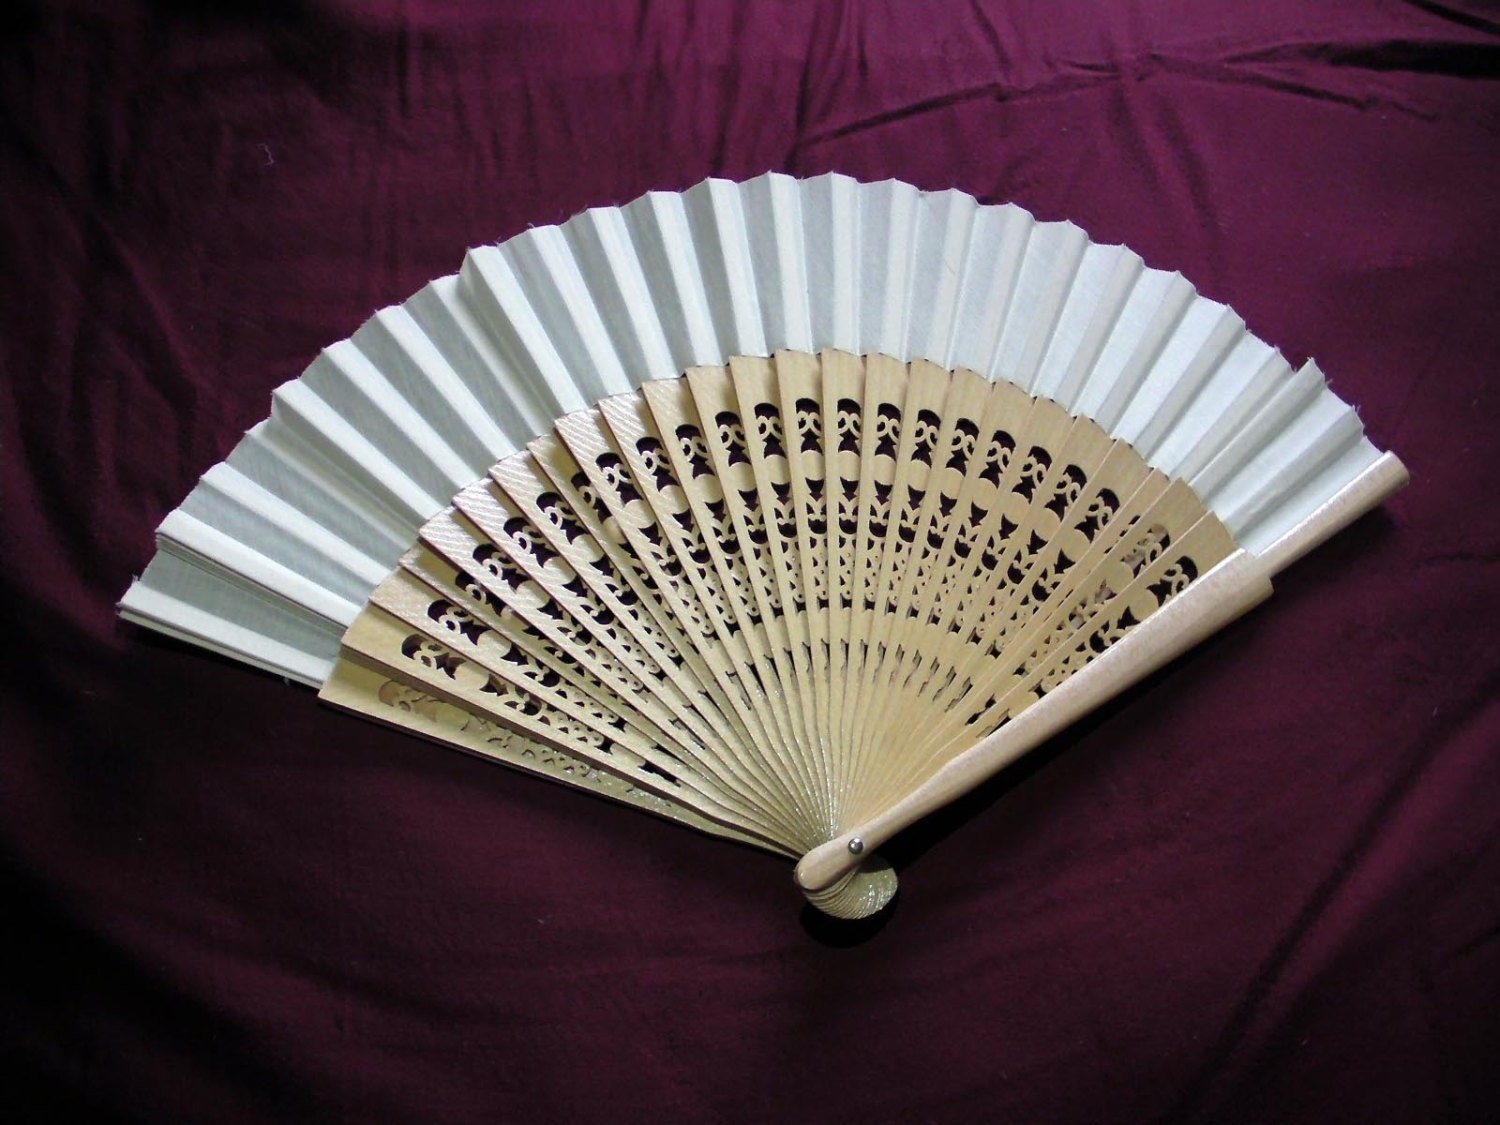 Chinese Hand Fan Vinatge 1970s White Fabric Wooden Handle - Etsy